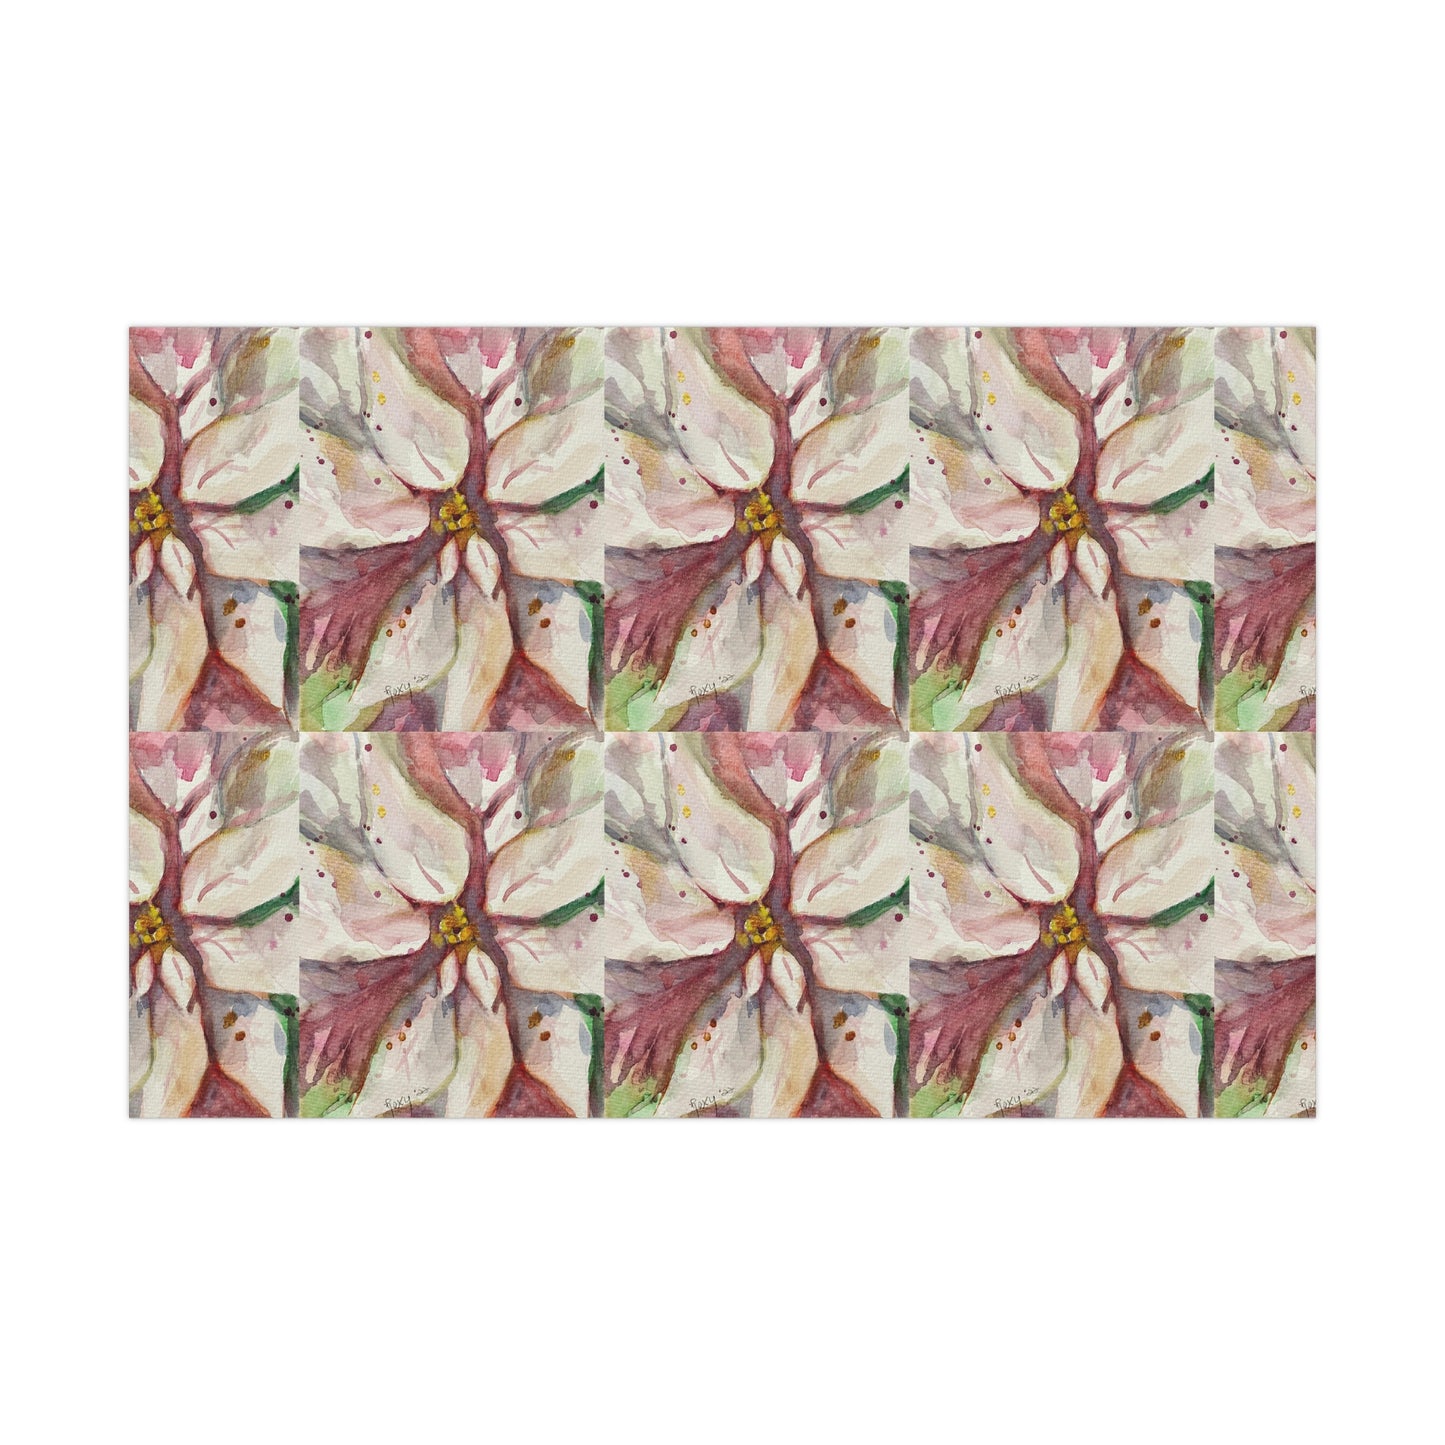 Elegant White Poinsettias Gift Wrapping Paper -Ships from America